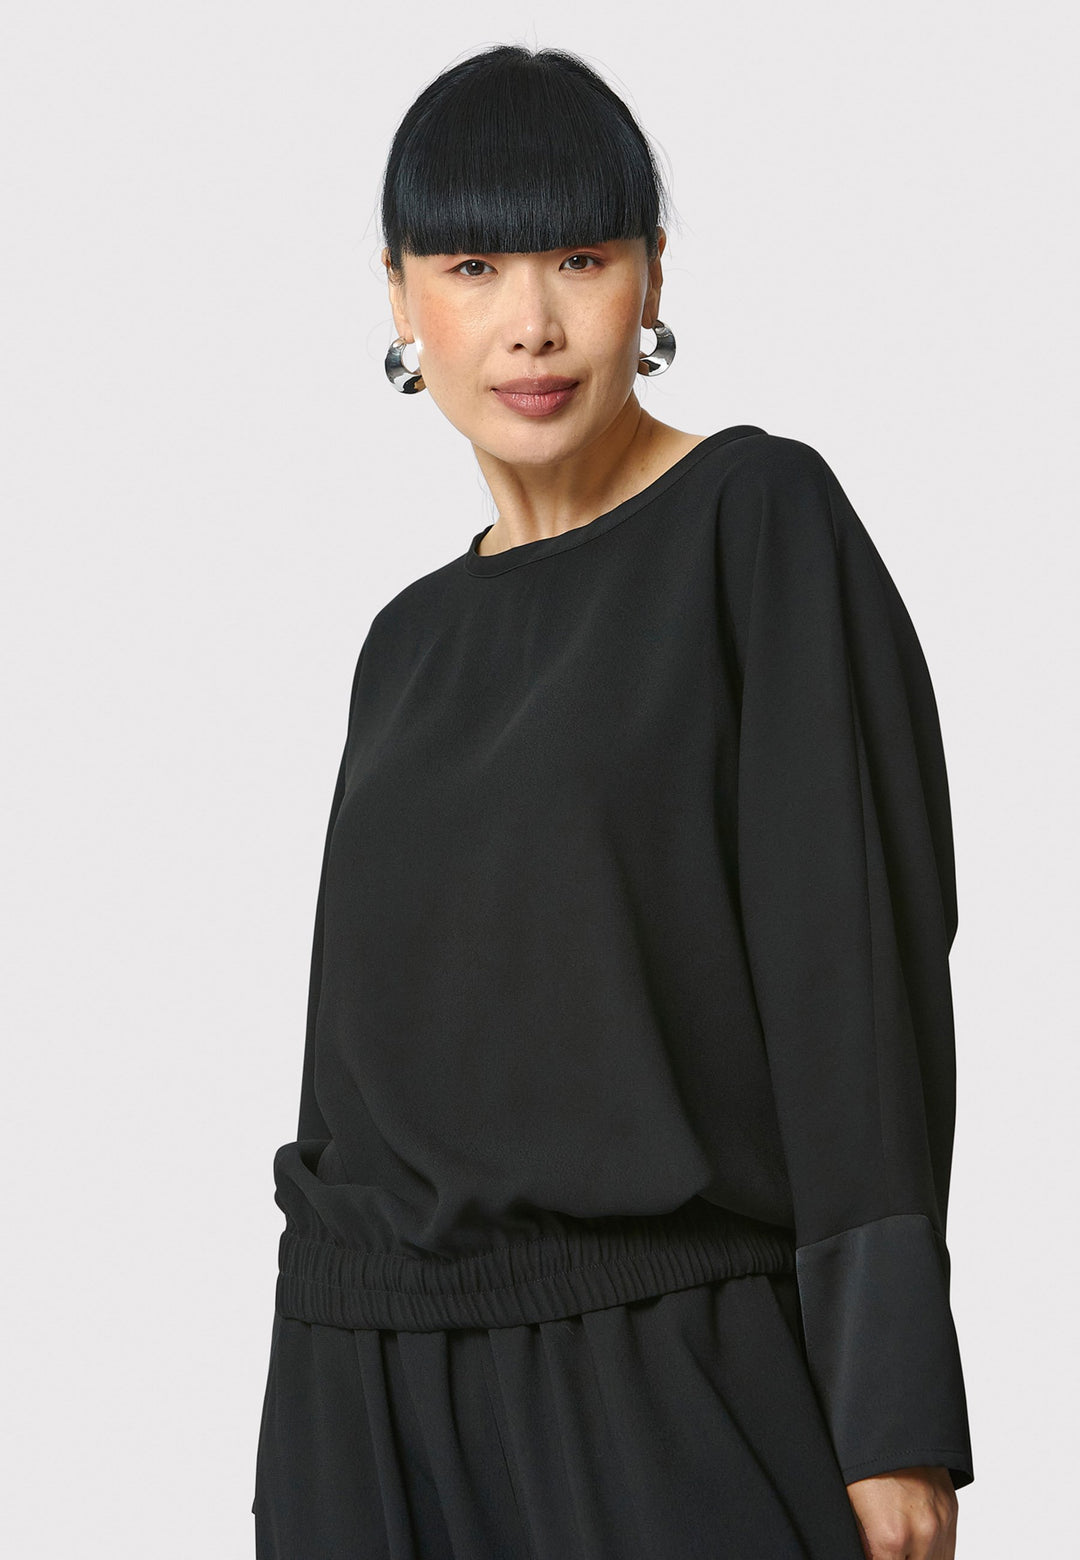 Lal, black top in fluid satin back crepe. A relaxed fit, elastic waistband, Dropped Shoulder sleeves, and satin cuffs. Wear with the coordinating Deliliah or Imogen Pant.